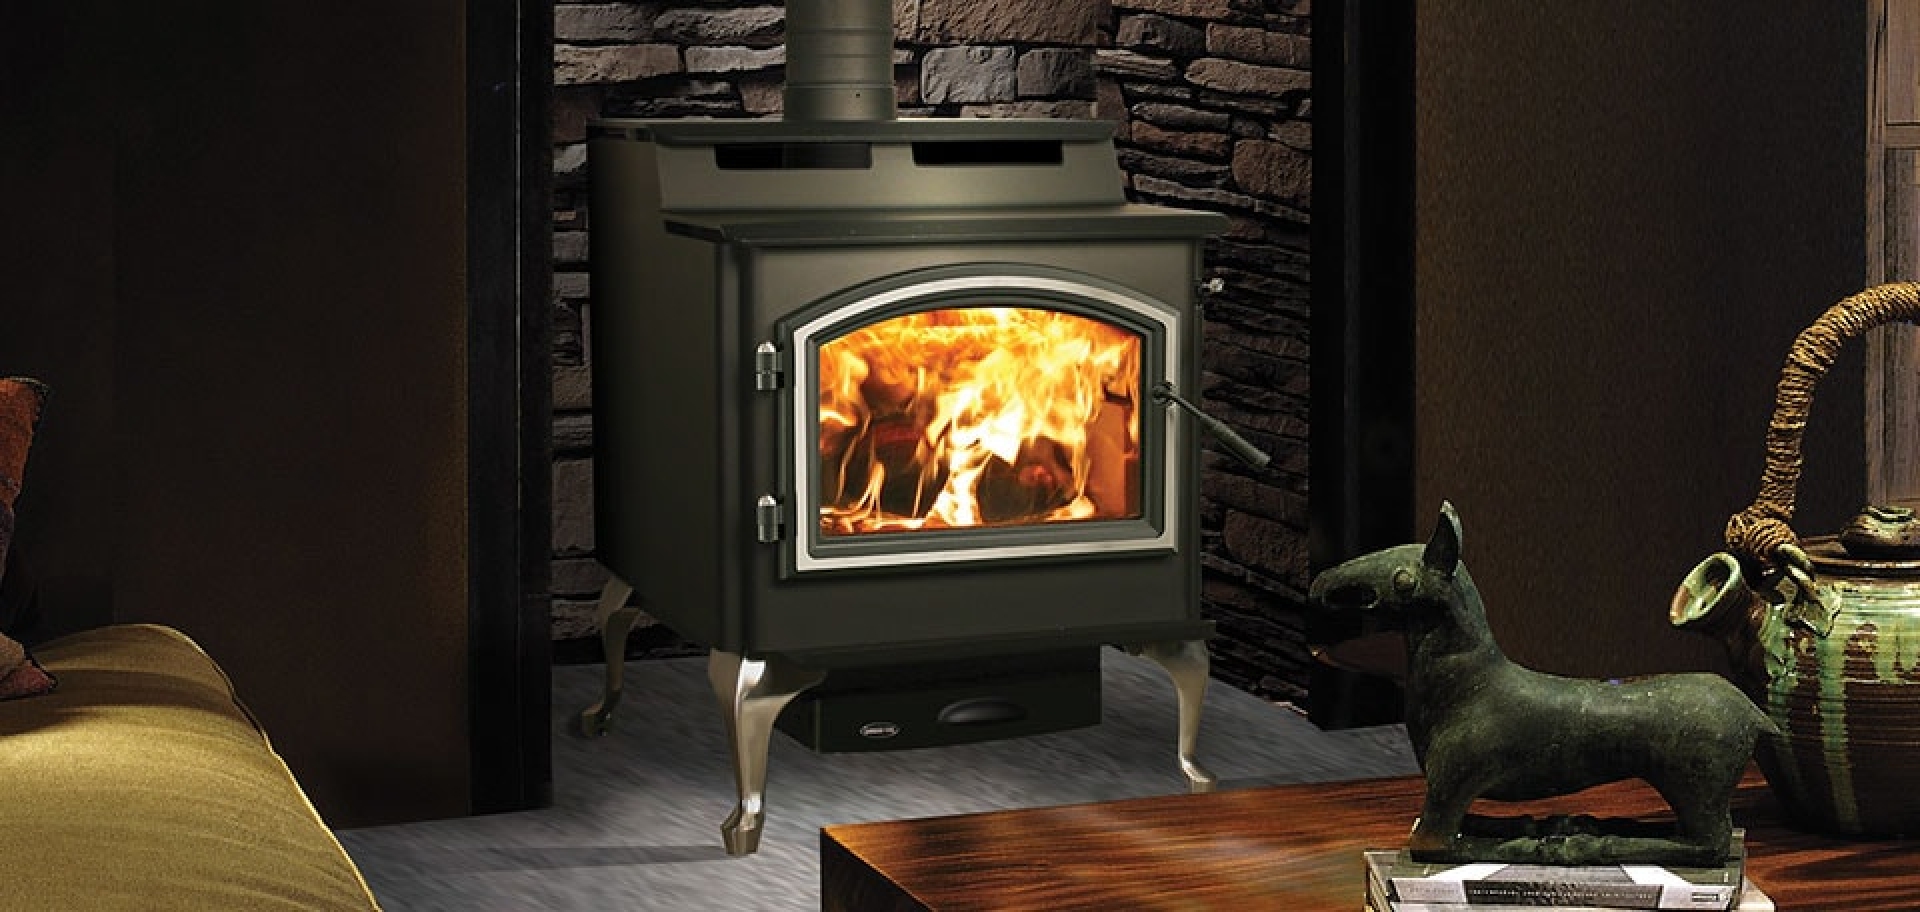 New Can You Burn Coal In A Wood Stove for Large Space